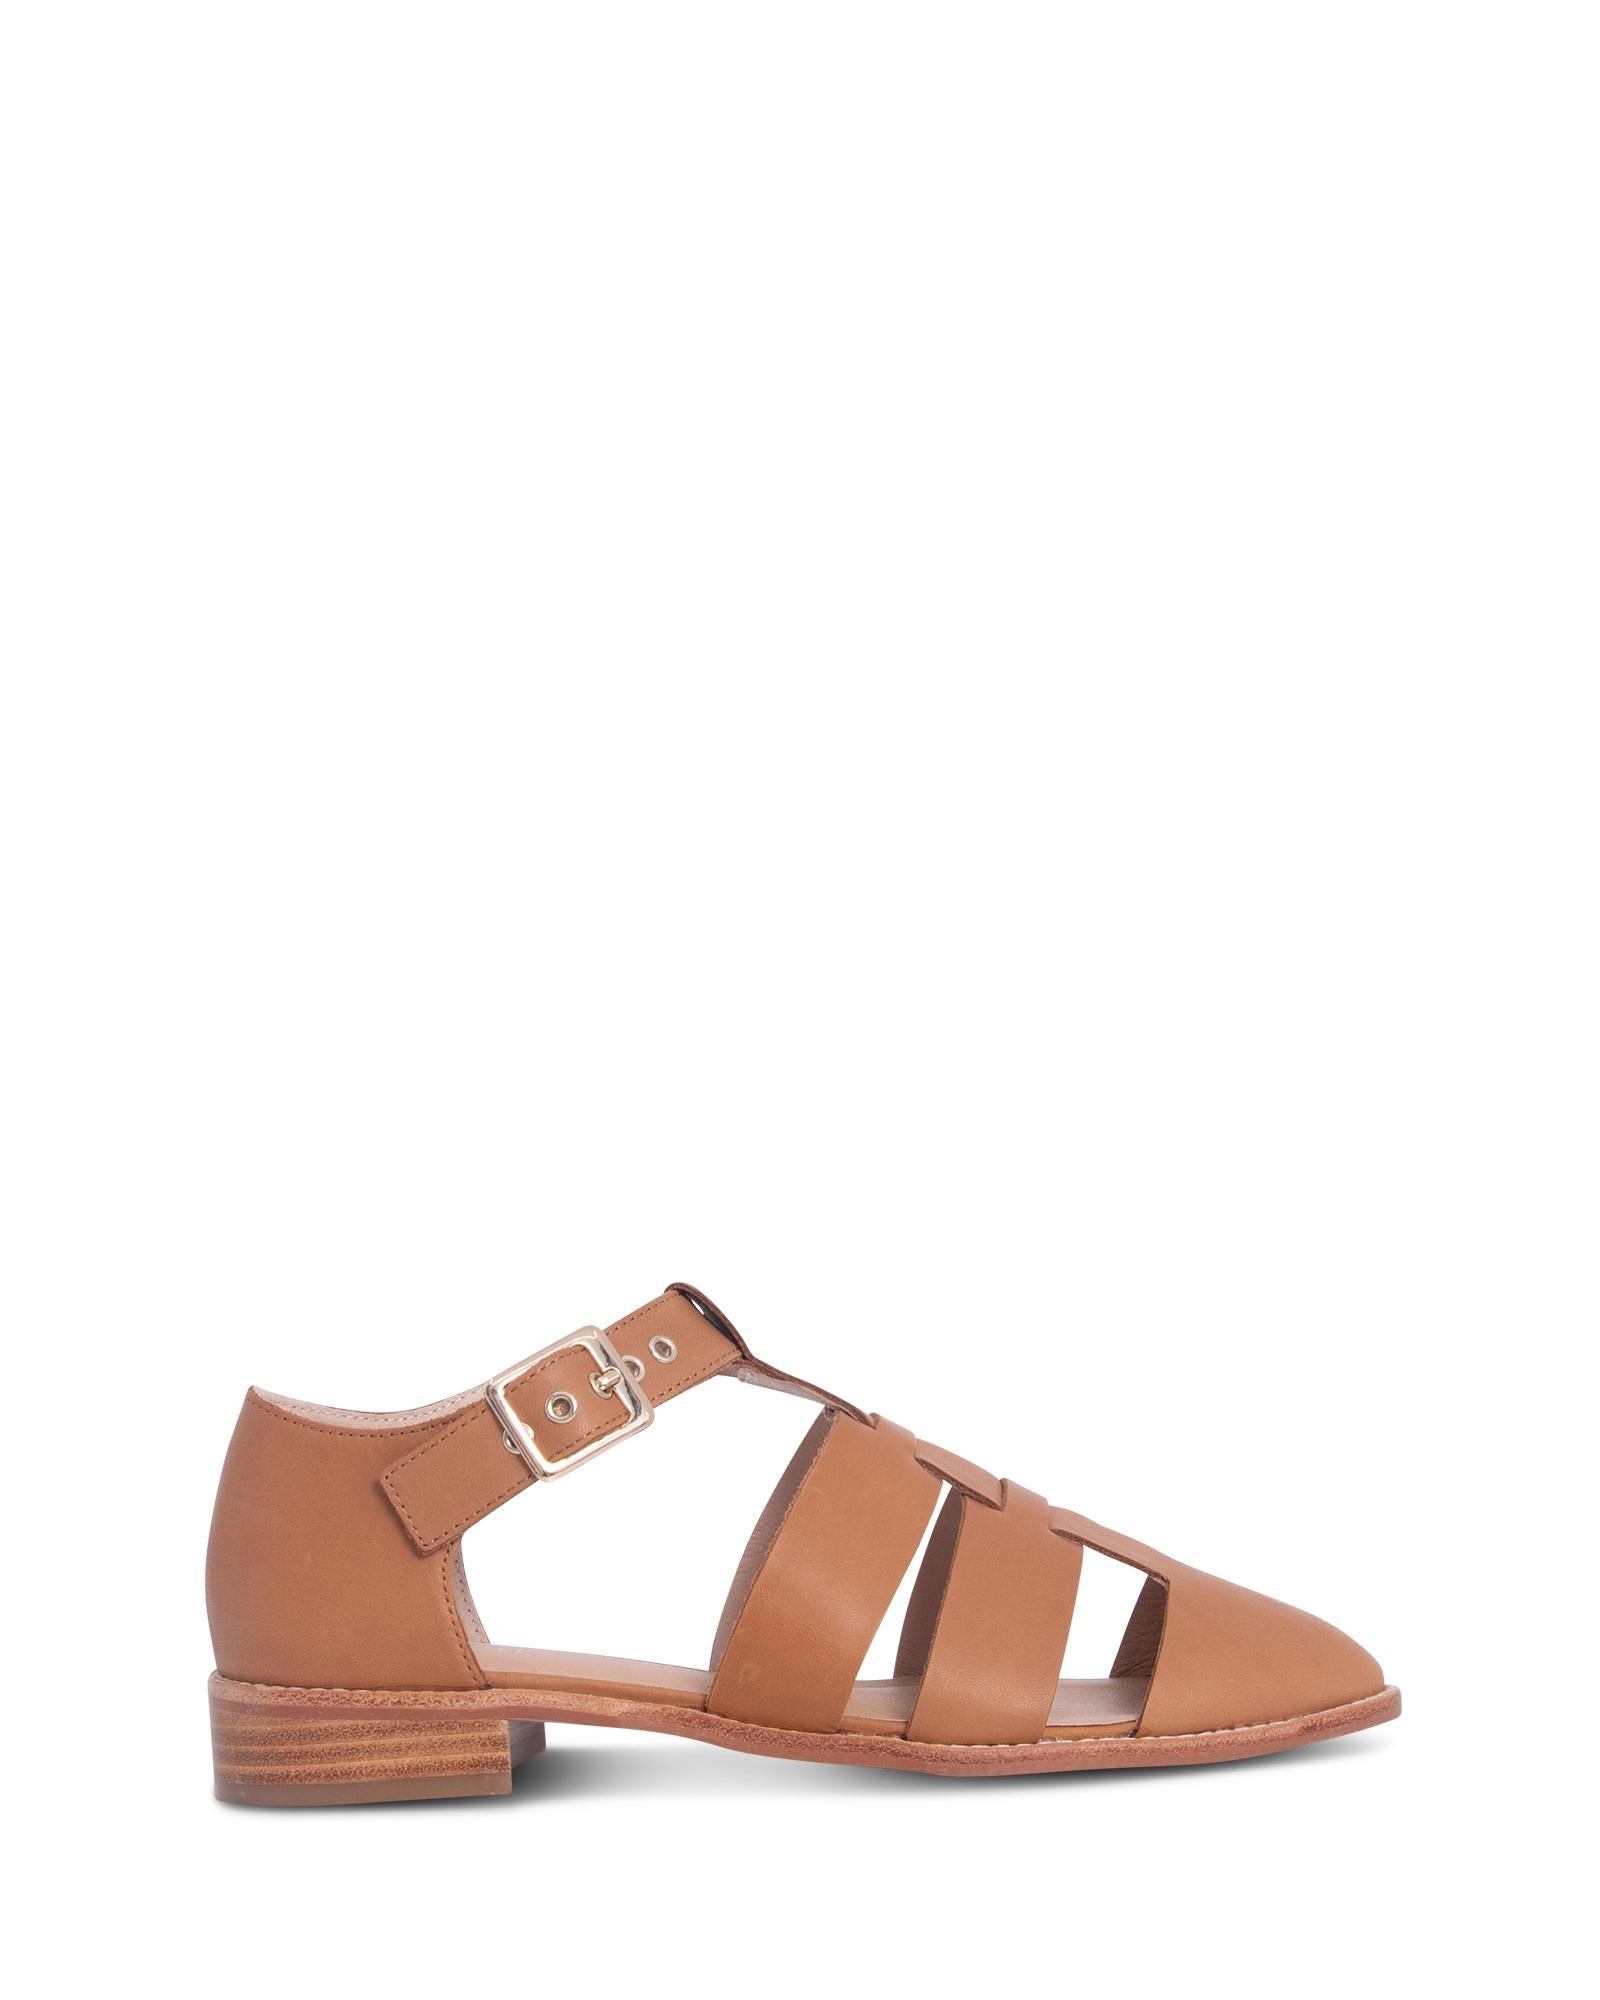 Cecilia Tan 2.5cm Sandal with Almond Toe and Adjustable Ankle Strap